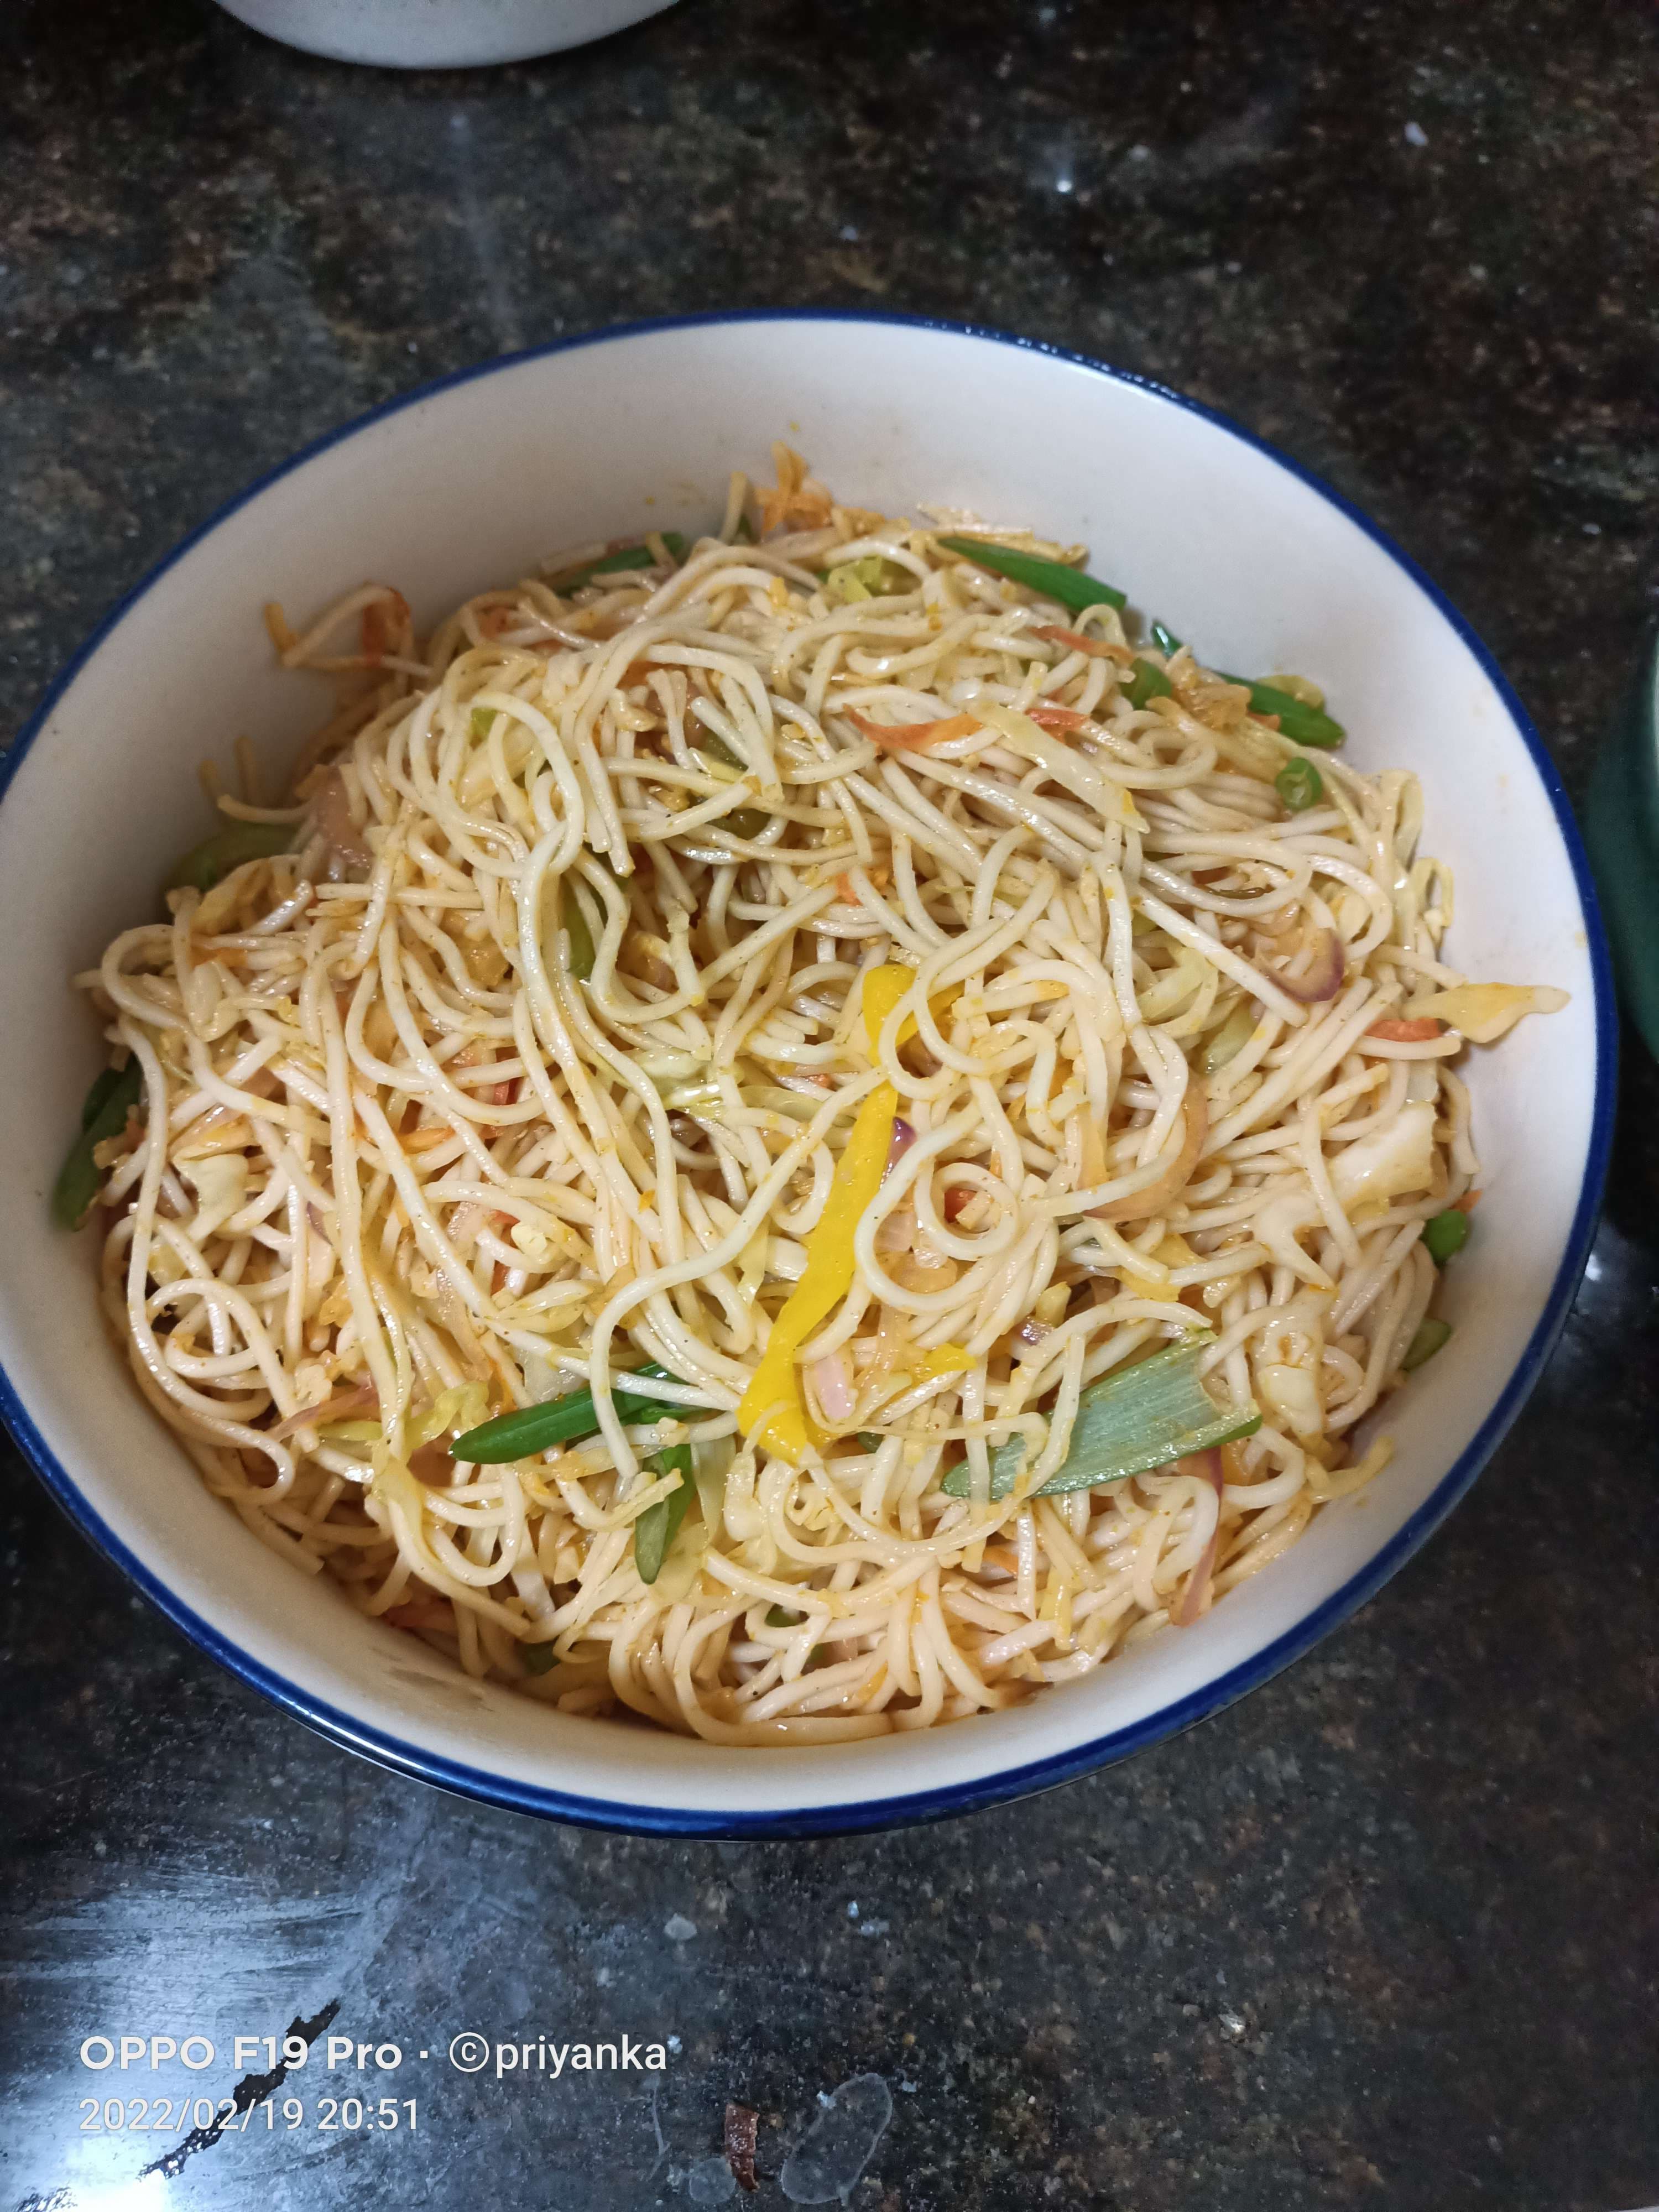 Delicious Chilly Garlic Noodles prepared by COOX